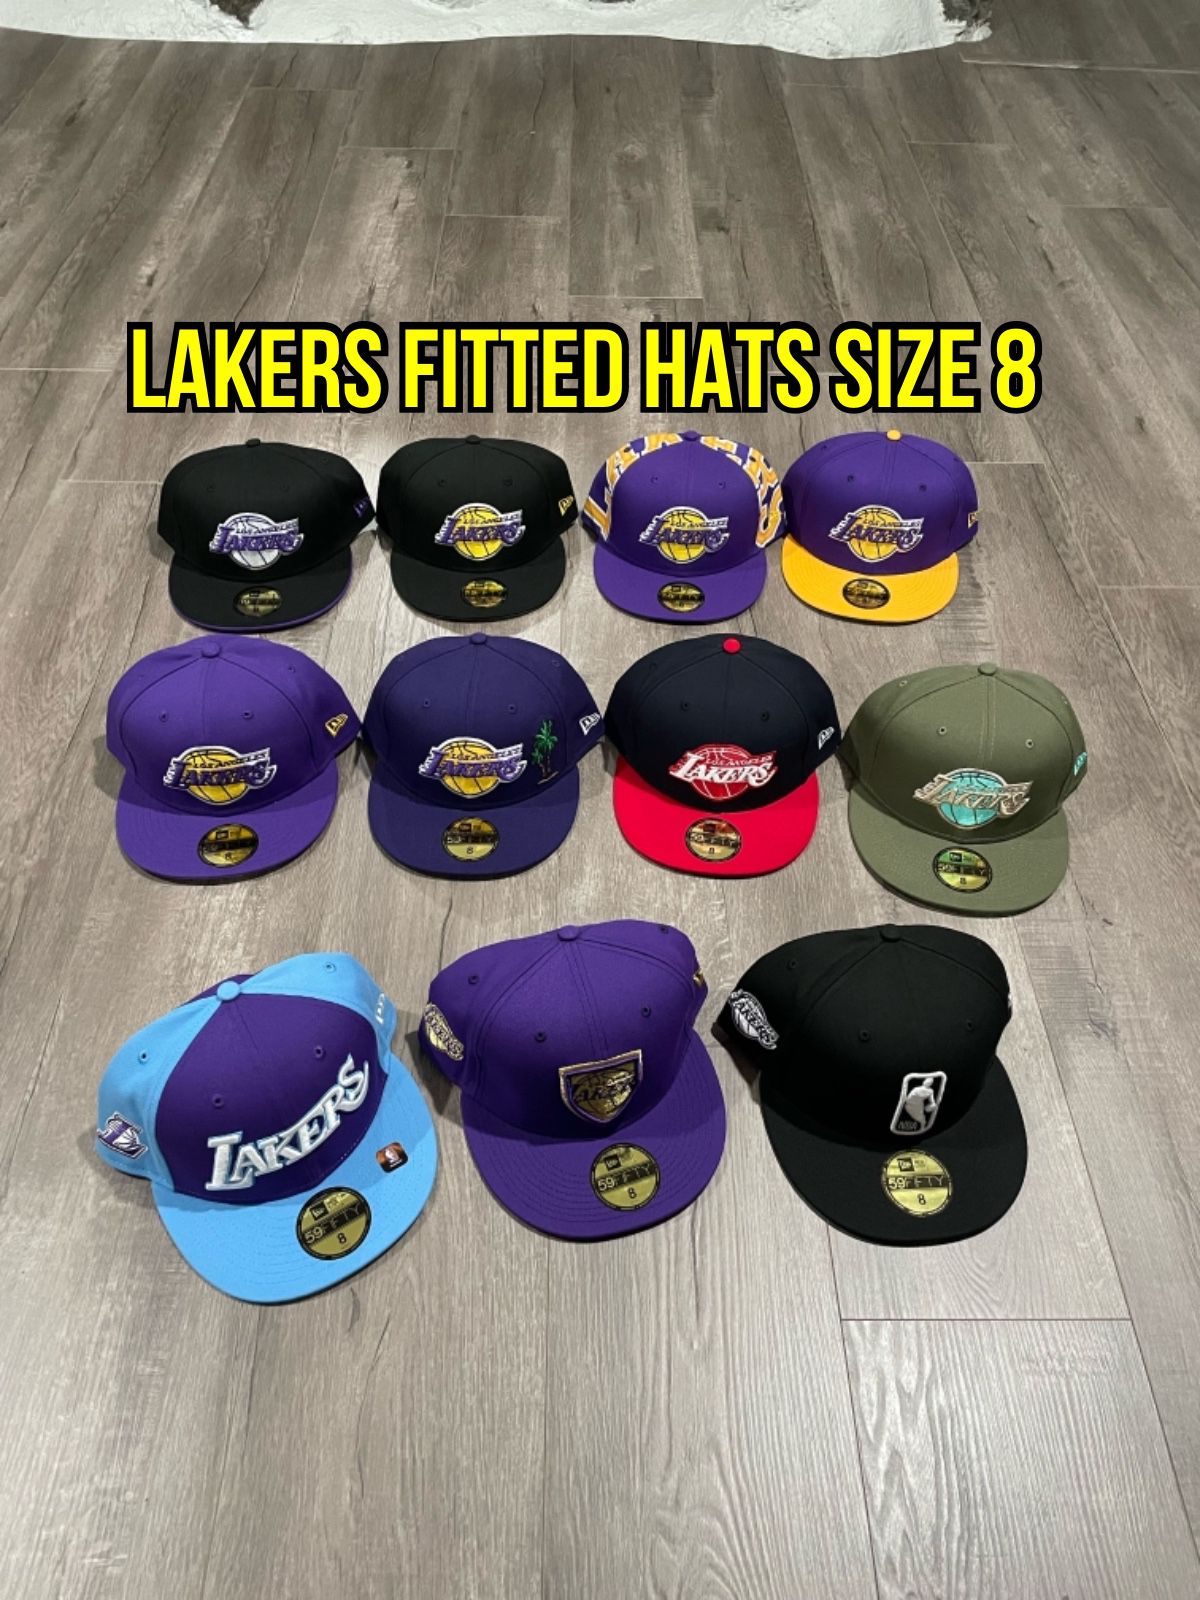 Los Angeles Lakers New Era 59fifty size 7.1/2”=59.6cm. ❌️ขายแล้ว